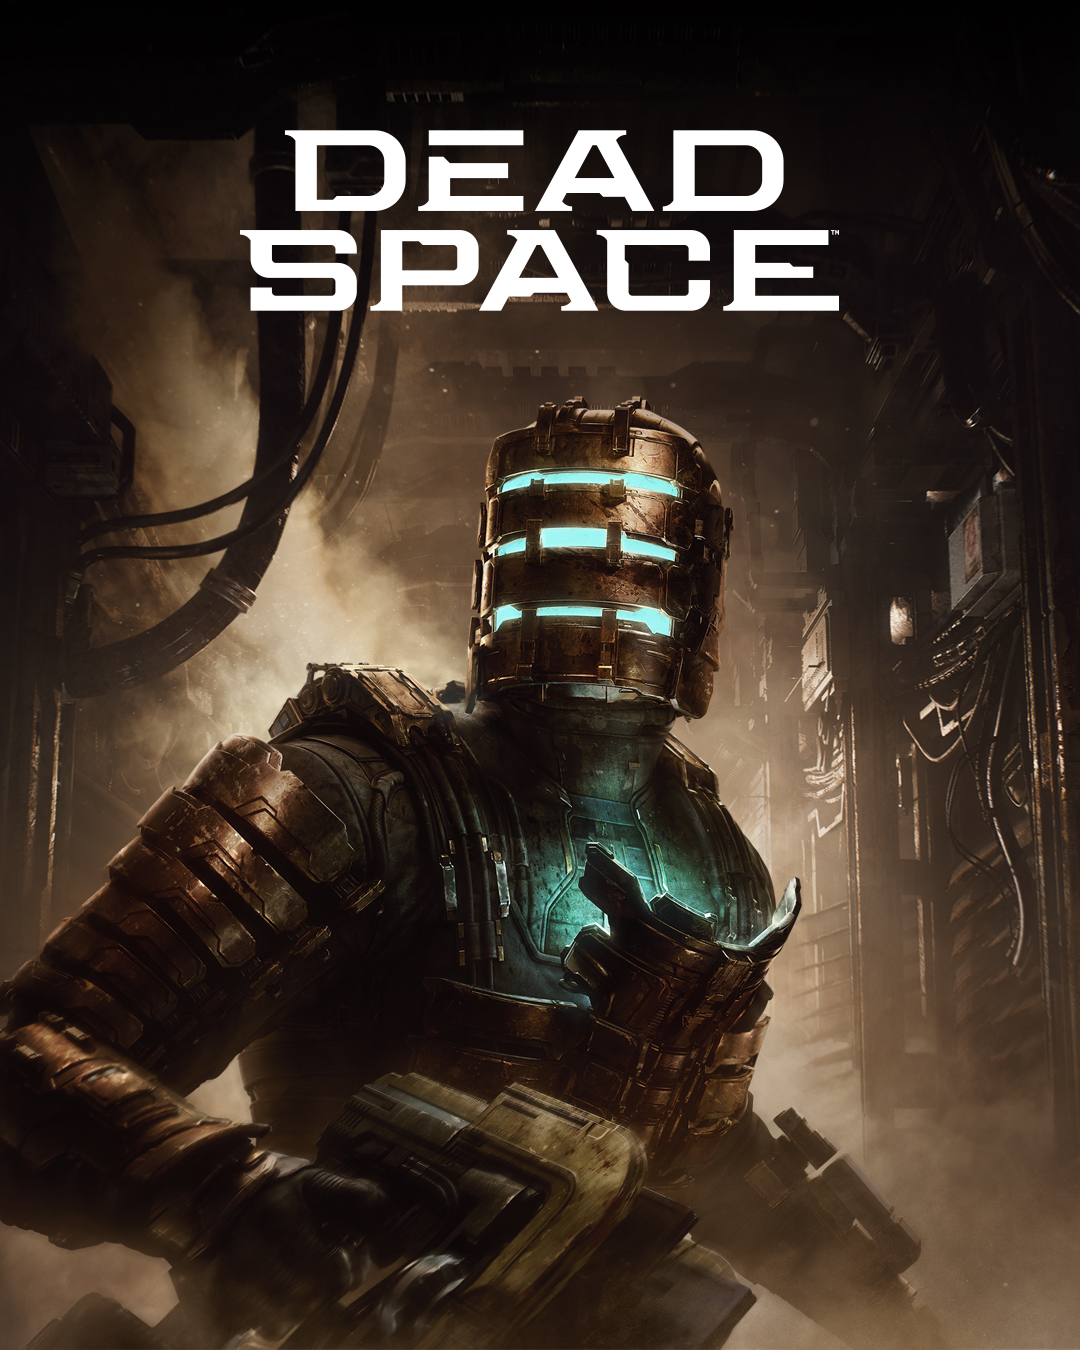 hoiw many chapters are in dead space 2